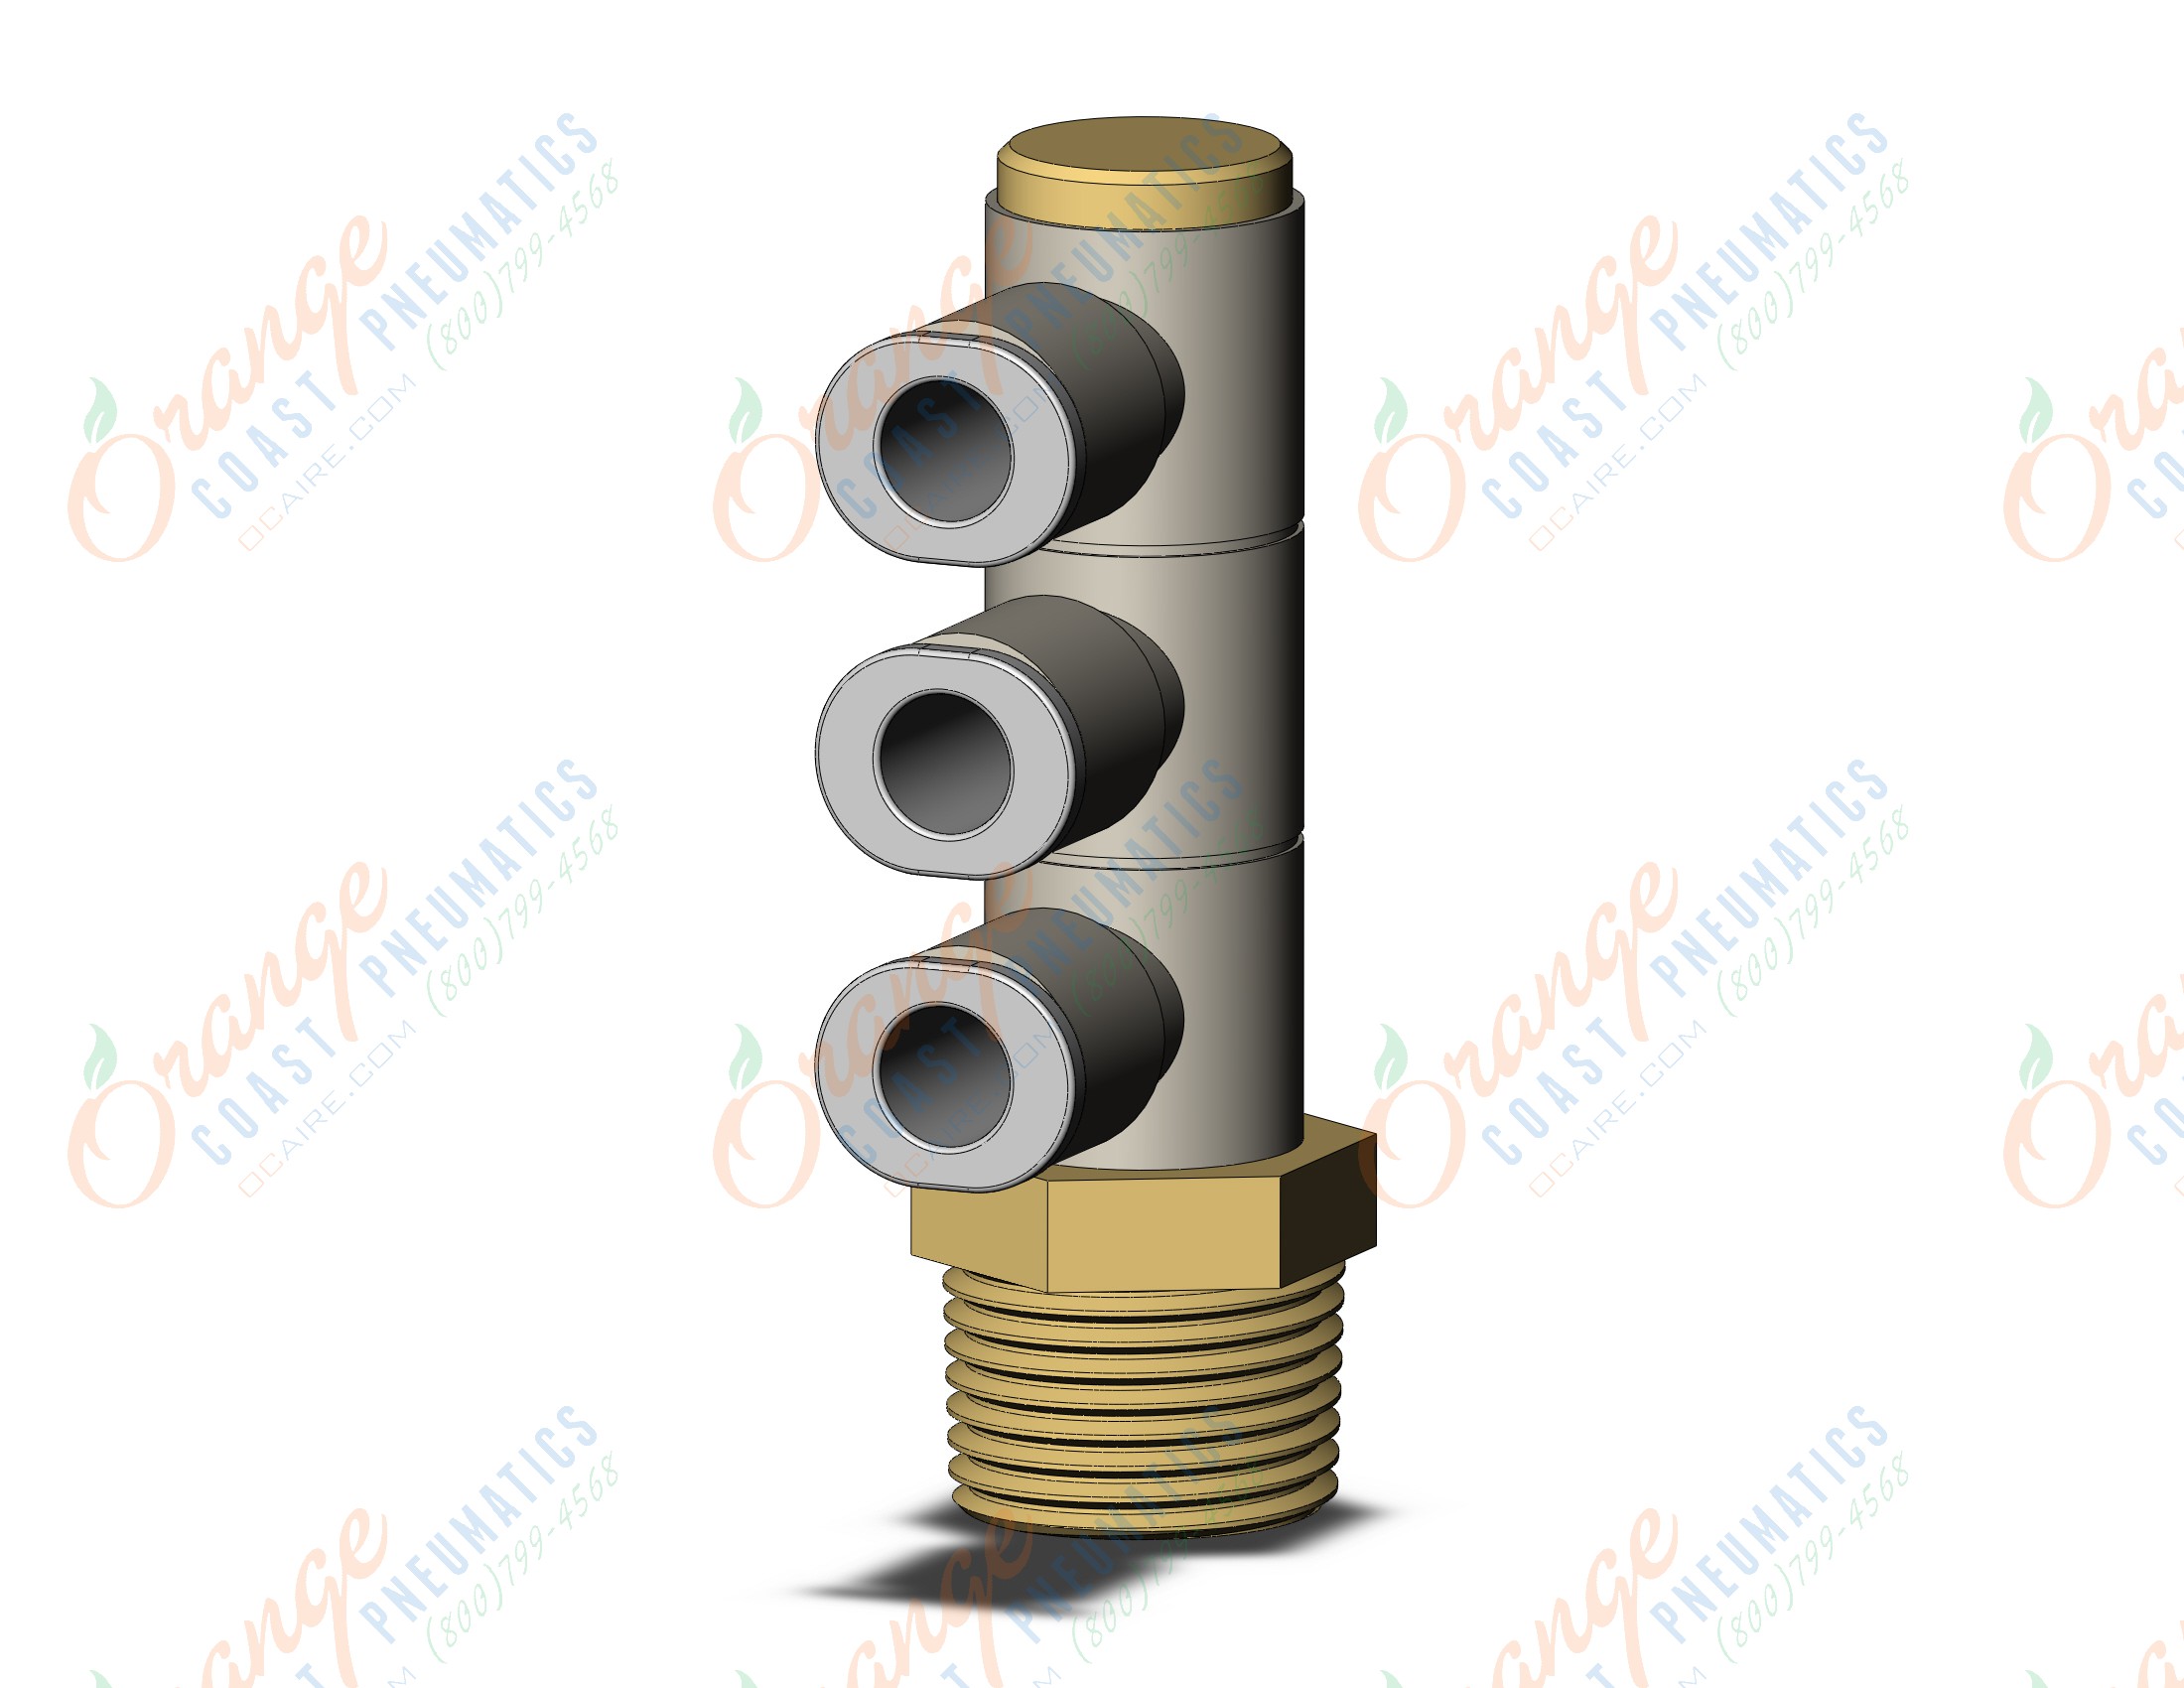 SMC KQ2VT06-03AS1 fitting, trpl uni male elbow, KQ2 FITTING (sold in packages of 10; price is per piece)